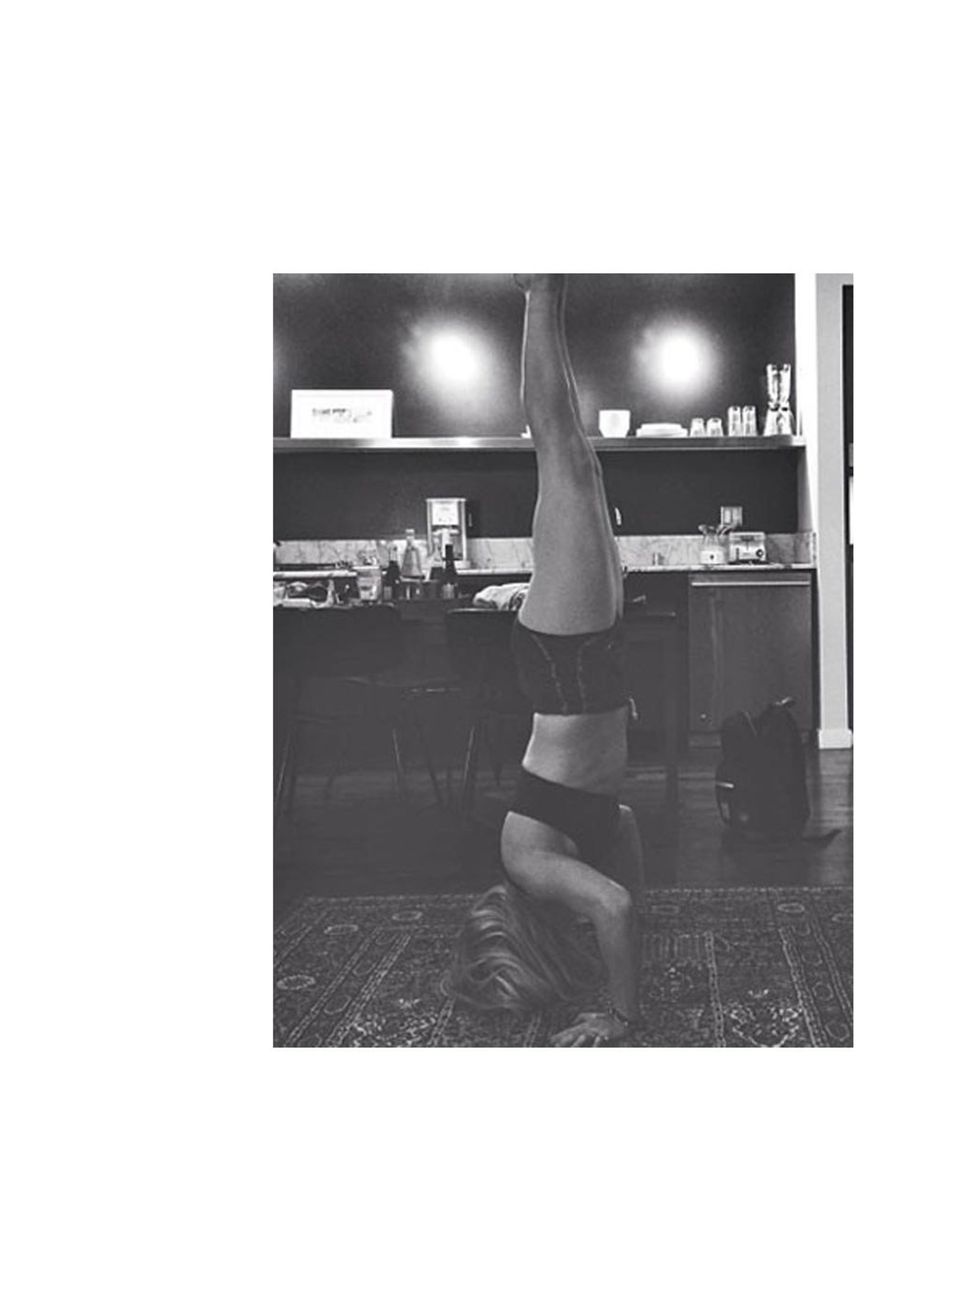 <p>Very impressive headstand there <a href="http://www.elleuk.com/beauty/running/5-minutes-with-ellie-goulding-lights-singer-running-playlist-training-marathon">Ellie</a>, but mind you don't get a head rush...</p>